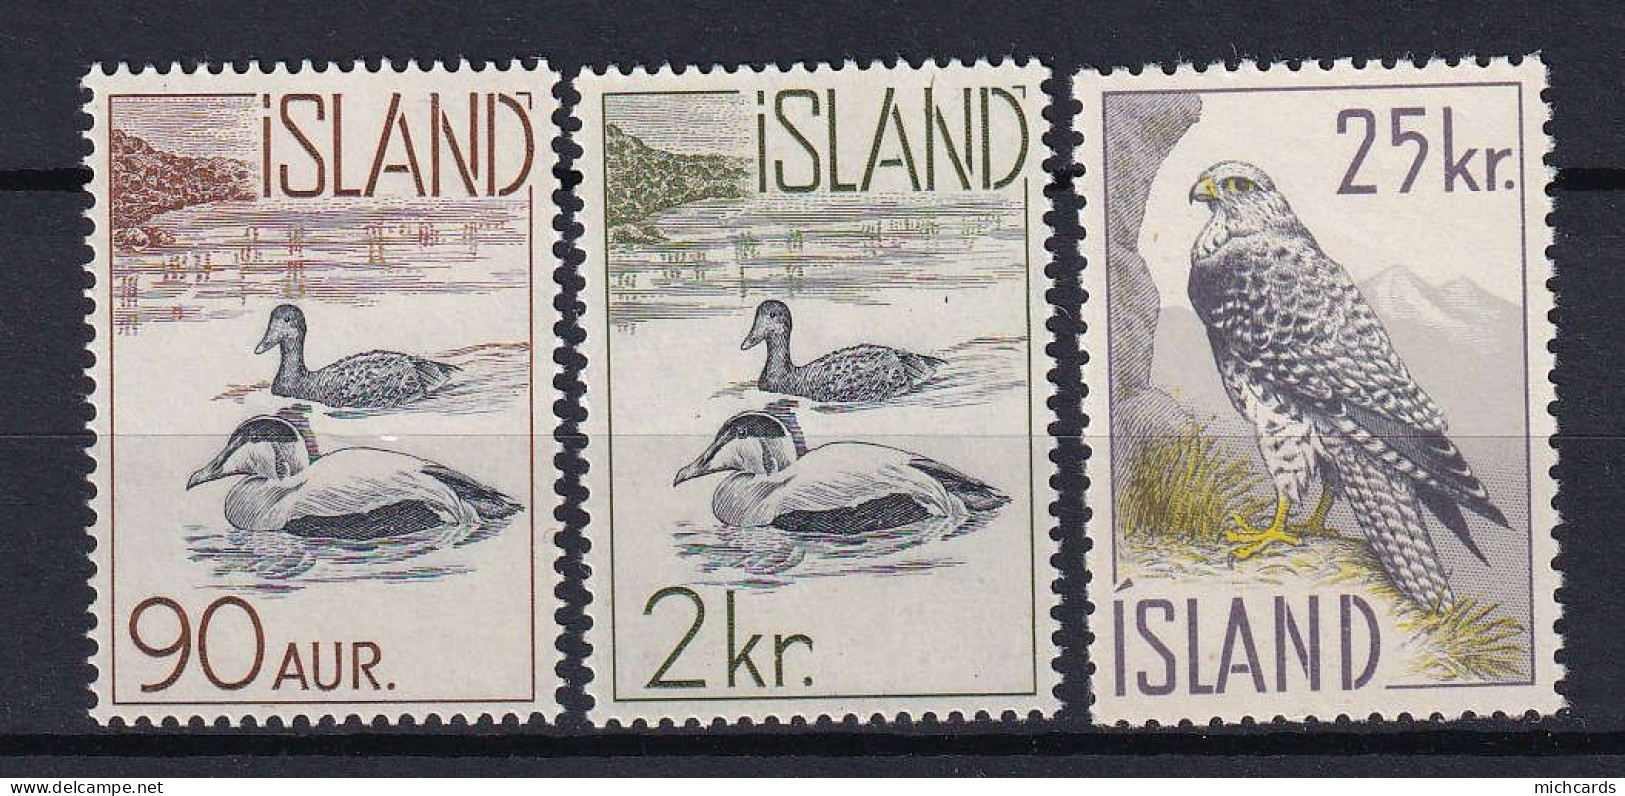 172 ISLANDE 1959 - Y&T 295 + 296 + 298 - Complet Oiseau Rapace Canard - Neuf ** (MNH) Sans Charniere - Unused Stamps